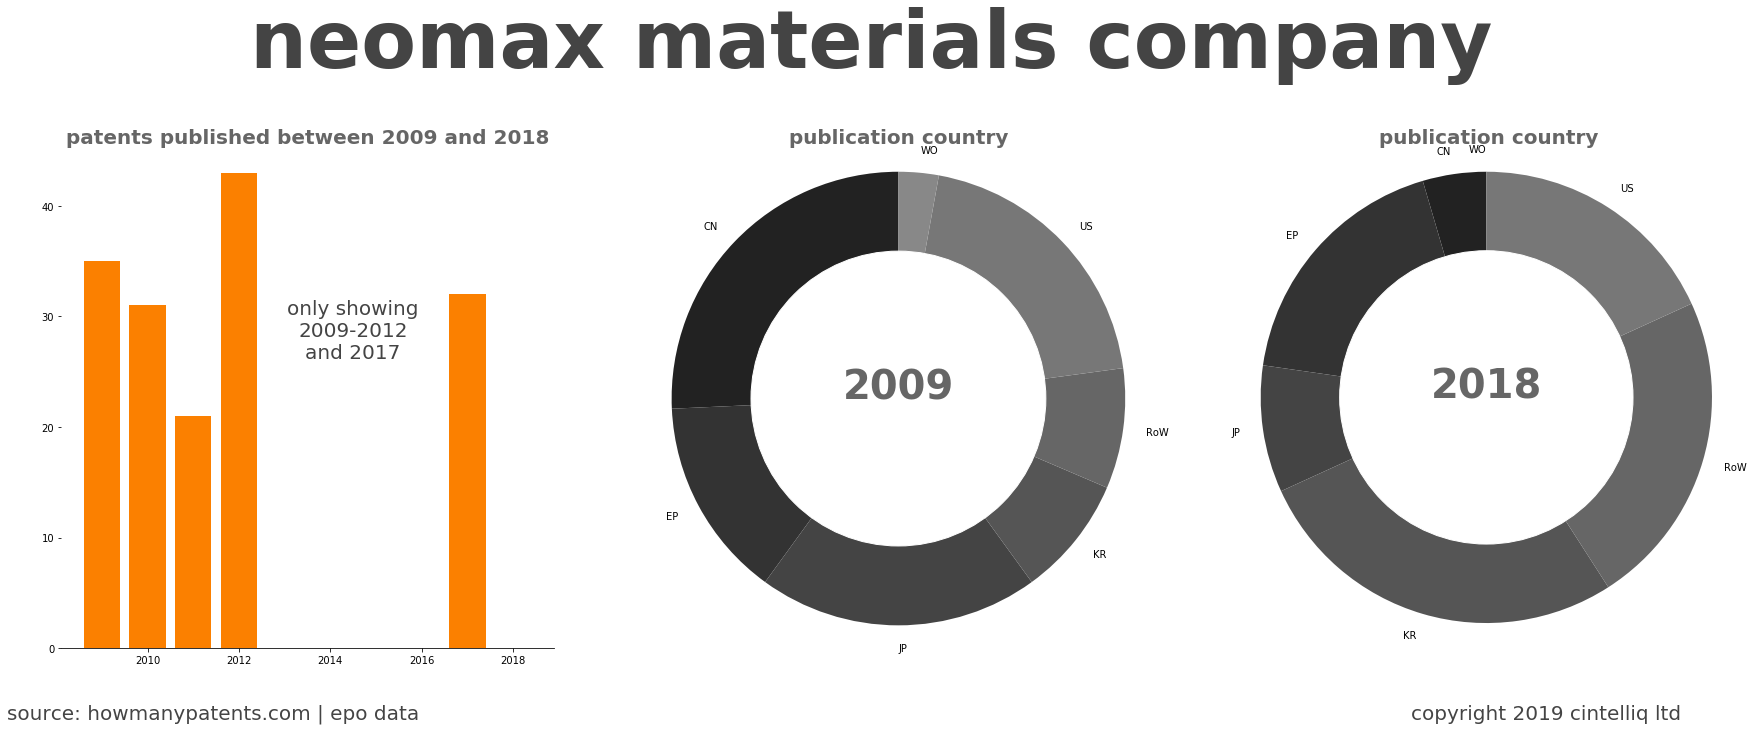 summary of patents for Neomax Materials Company